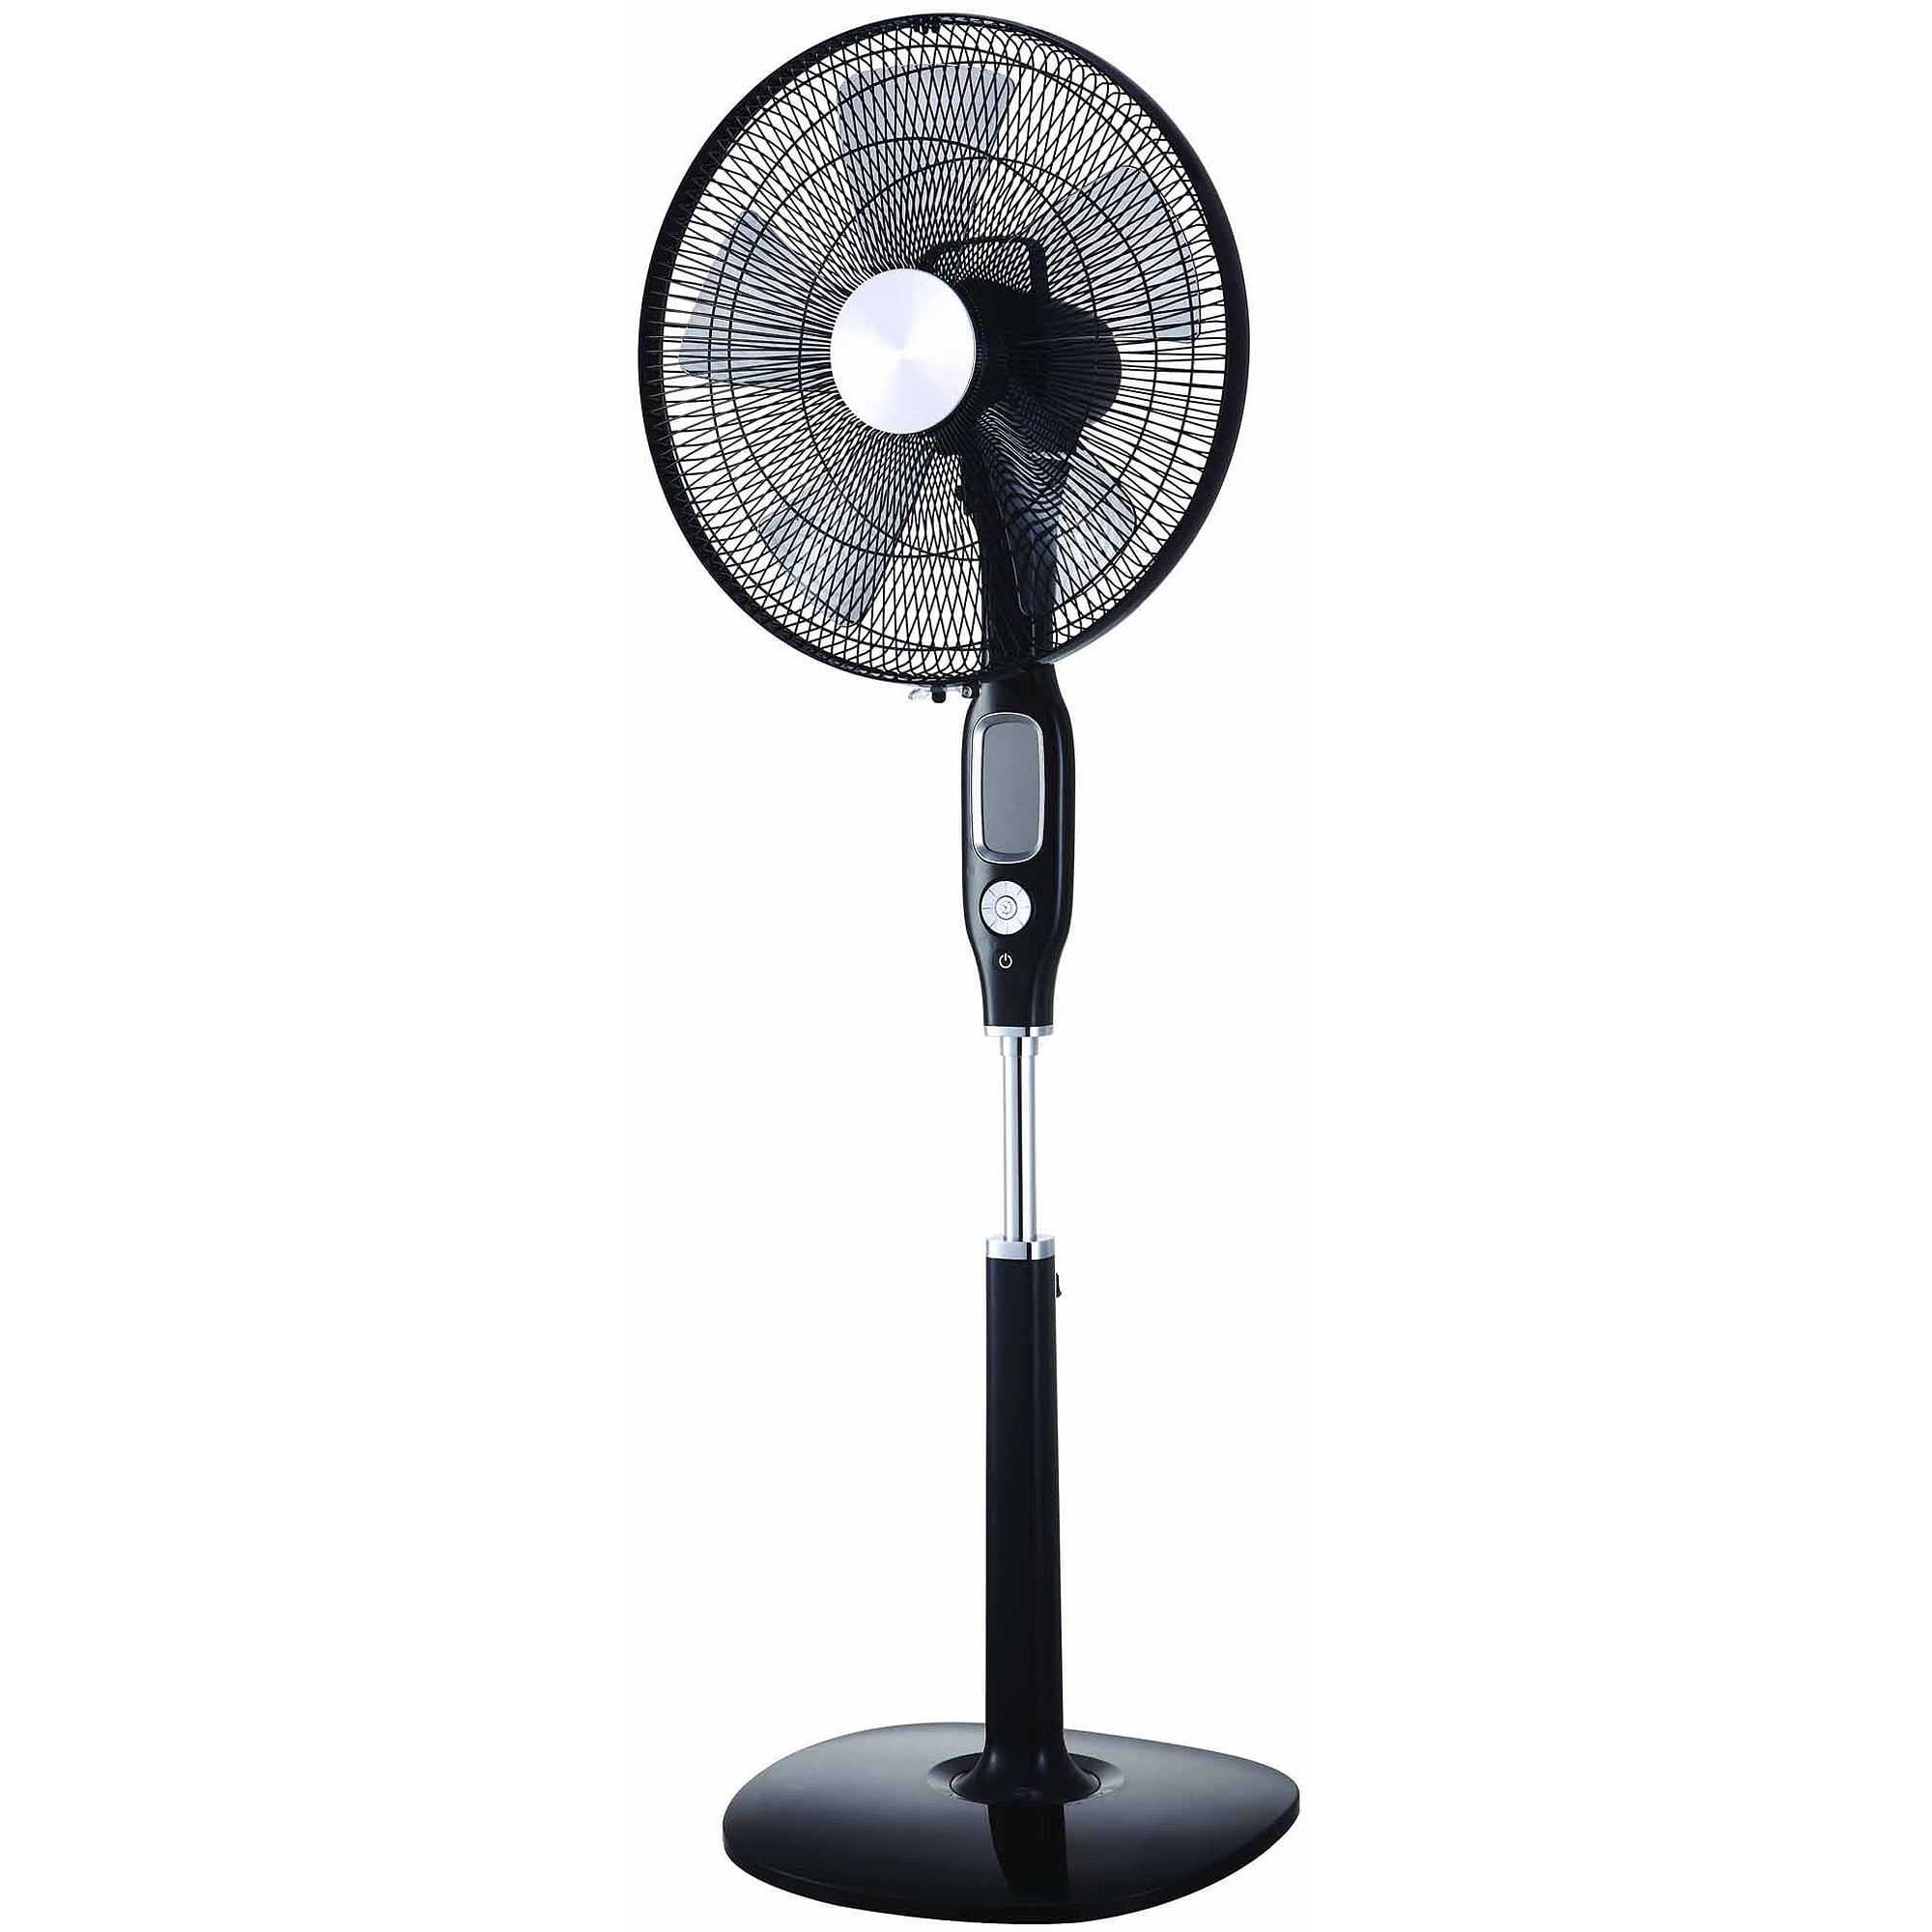 GEZICHTA Fan 16inch 400mm 3 Leaves Big Wind Appliance Accessory Safe Low Noise with Nut sy Install Stand Table Fanner Universal Replacement Parts for Midea